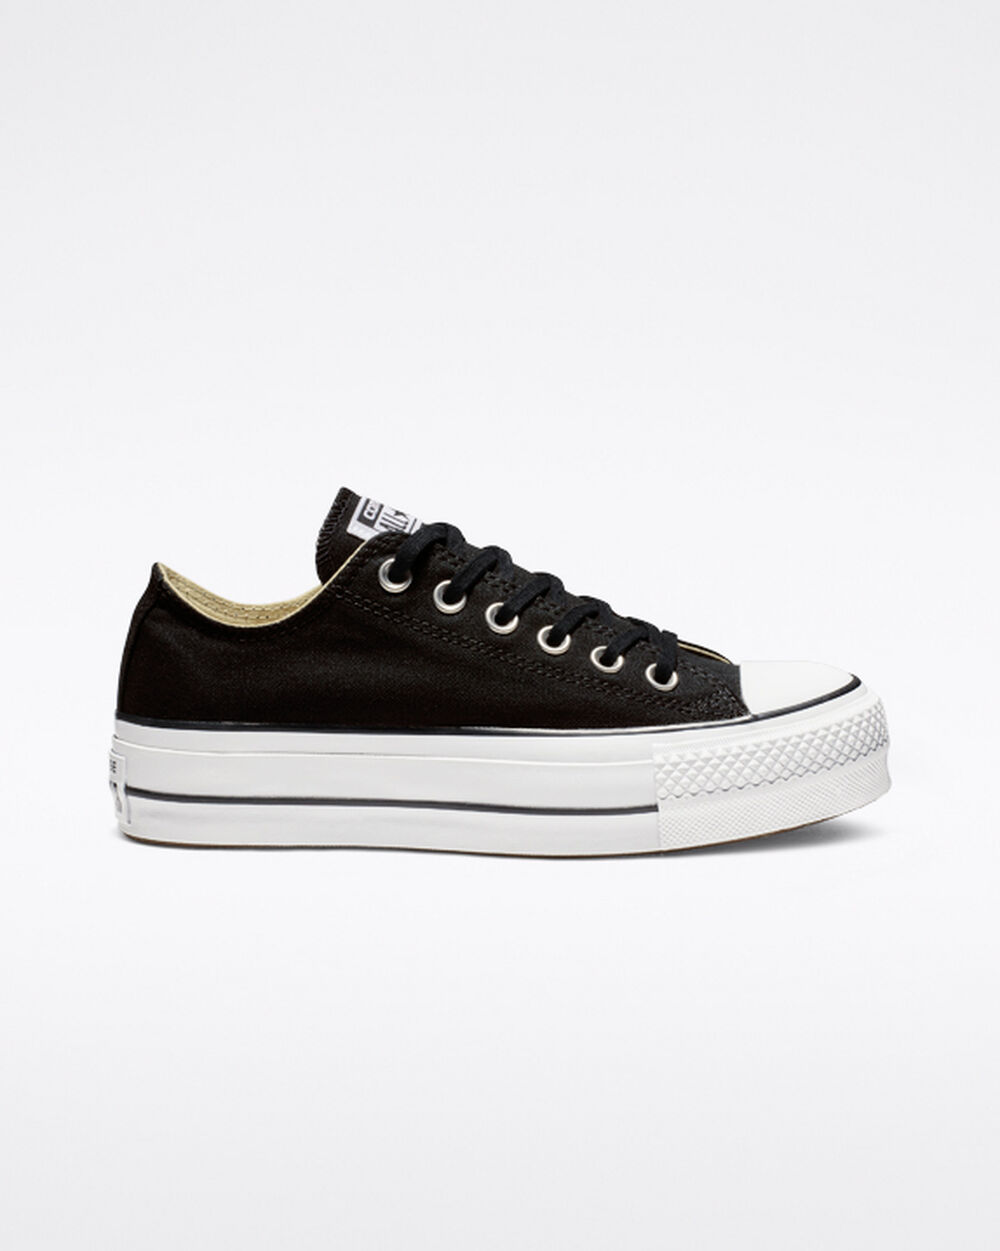 Tenis Converse Chuck Taylor All Star Mujer Negros Blancos | Mexico-684276